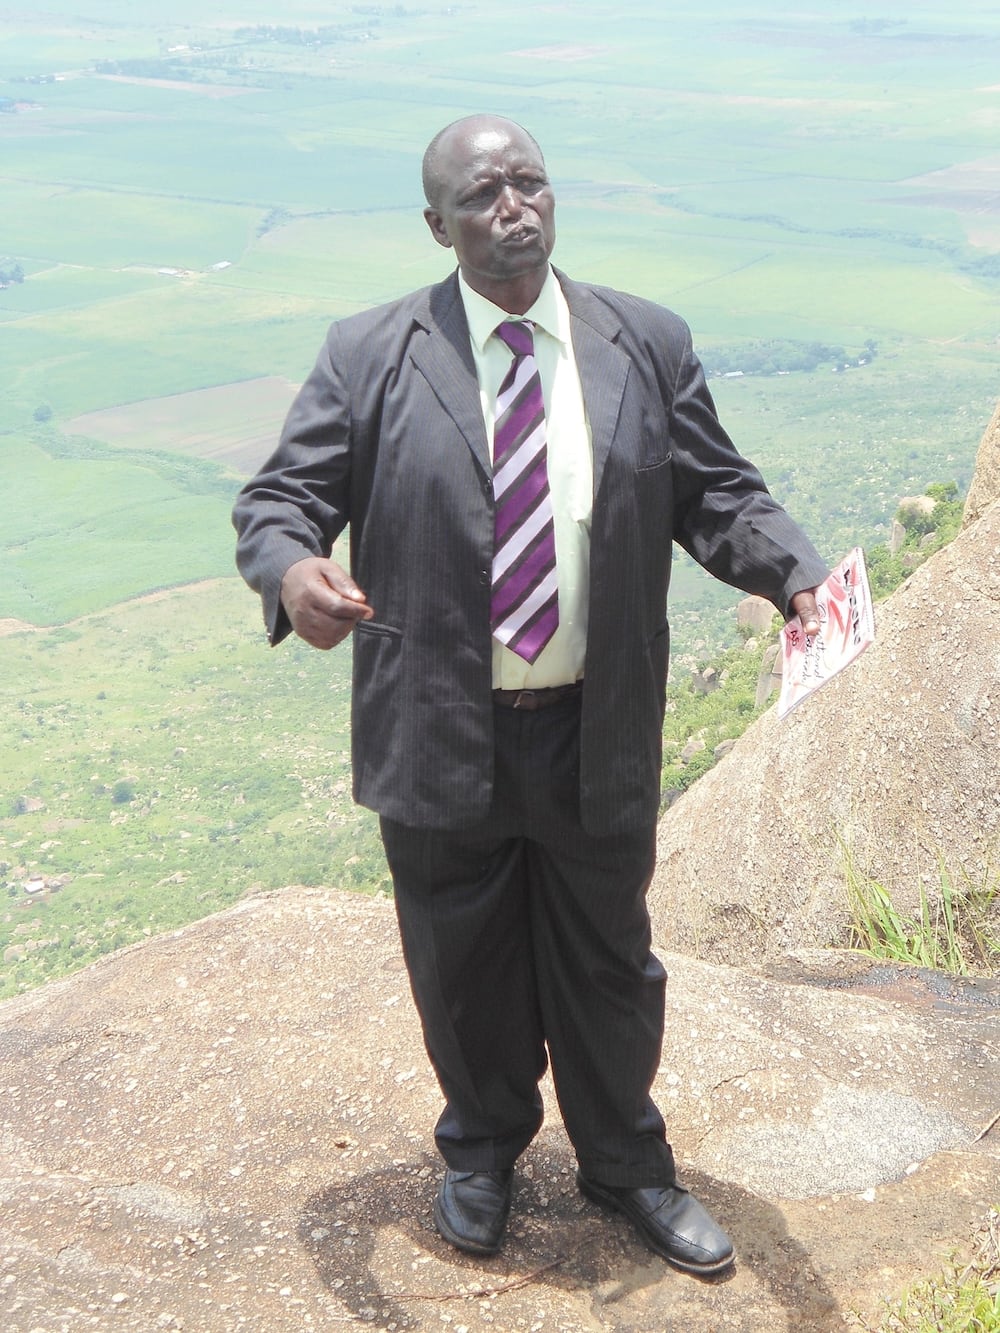 The sacred Nandi county cliff where the aged willingly jump to their death